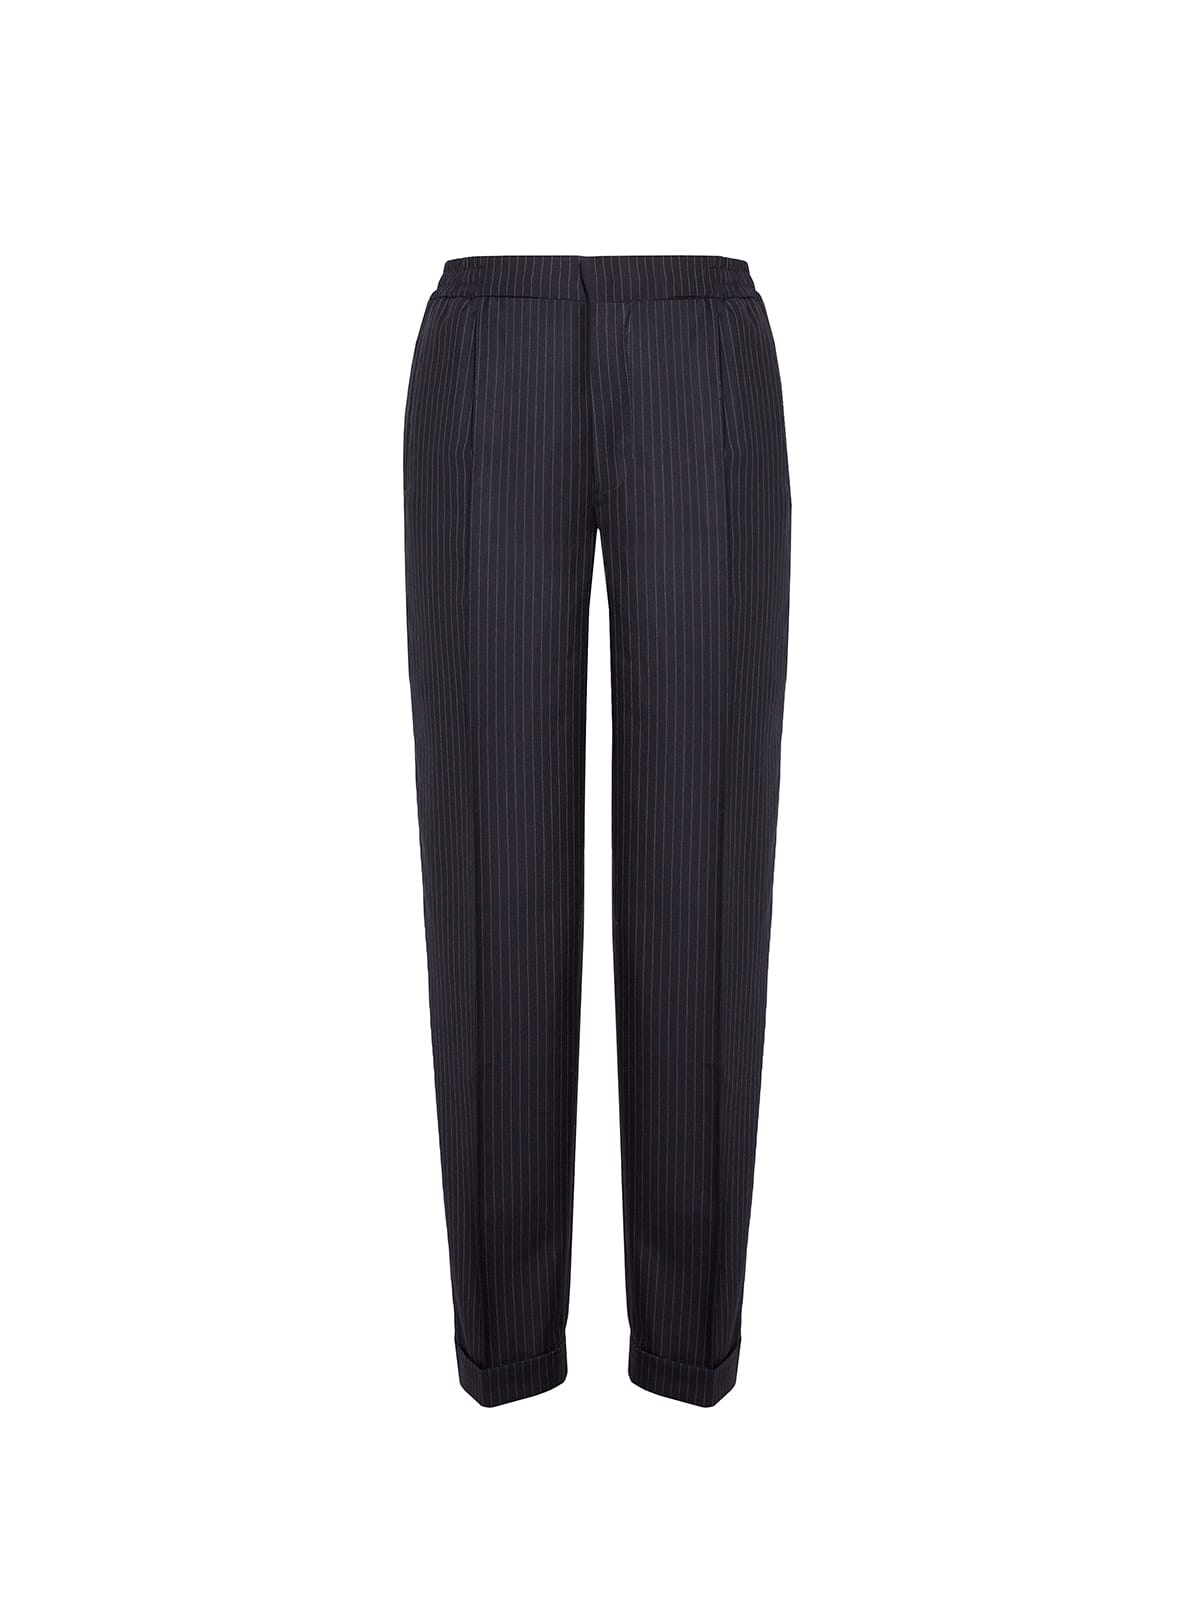 WOOL PANTS - DILIGENT Clothes Official Site / Poland / Fashion Brand ...